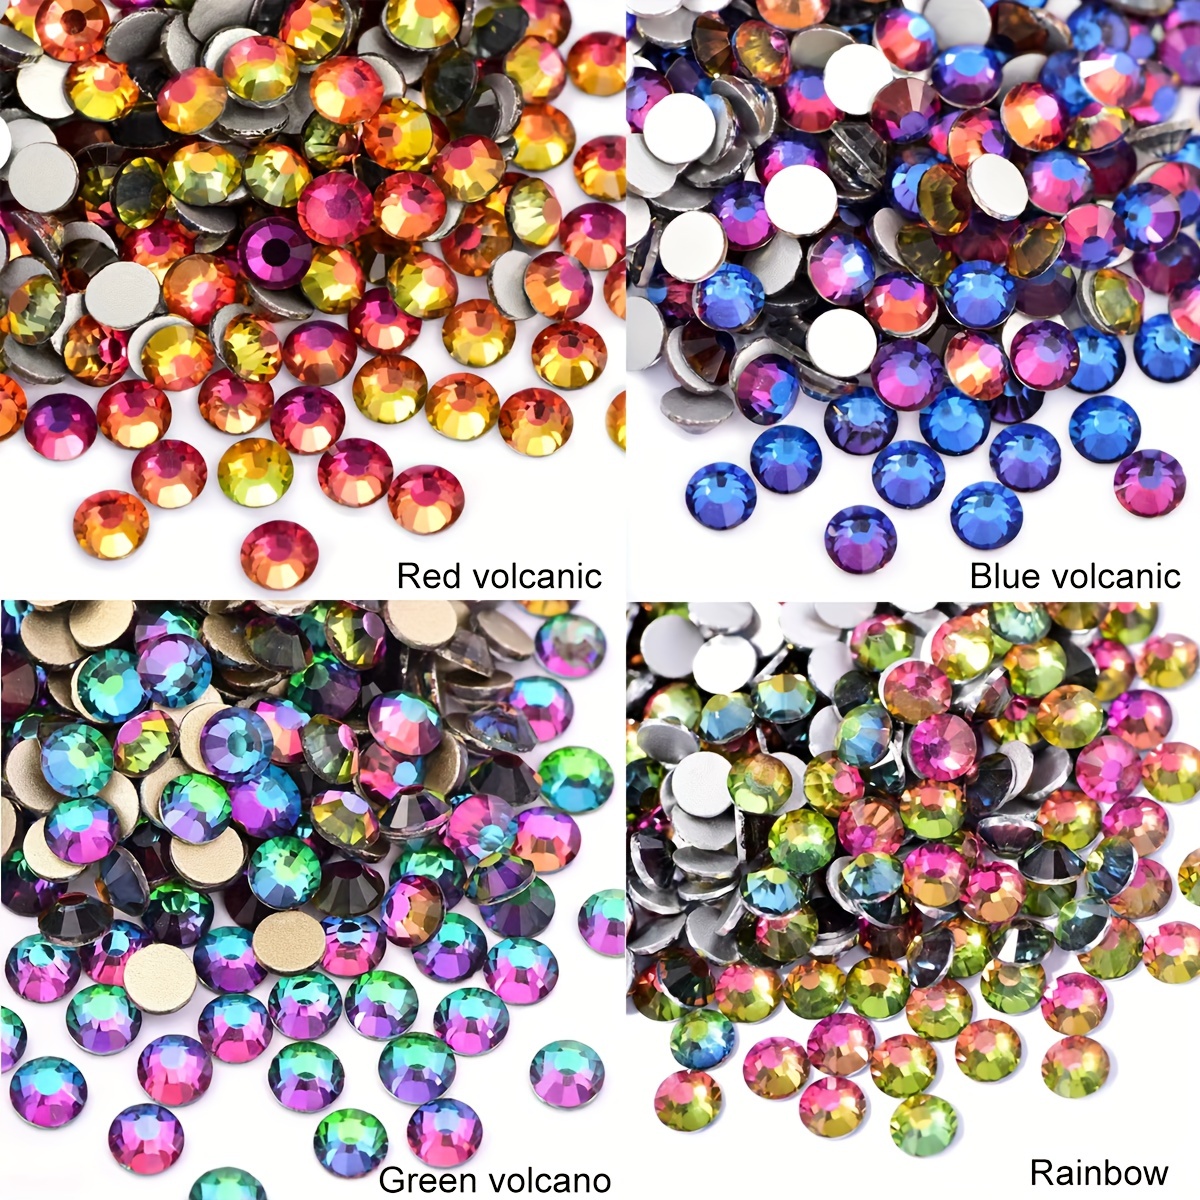  10000PCS Mixed 2-6mm Black Flatback Rhinestones for Nails, 3mm  Nail Gems 4mm Round Crystal Gemstones 2mm/5mm/6mm Black Rhinestones for  Crafts, Nail Art Design, Makeup,Tumblers : Beauty & Personal Care